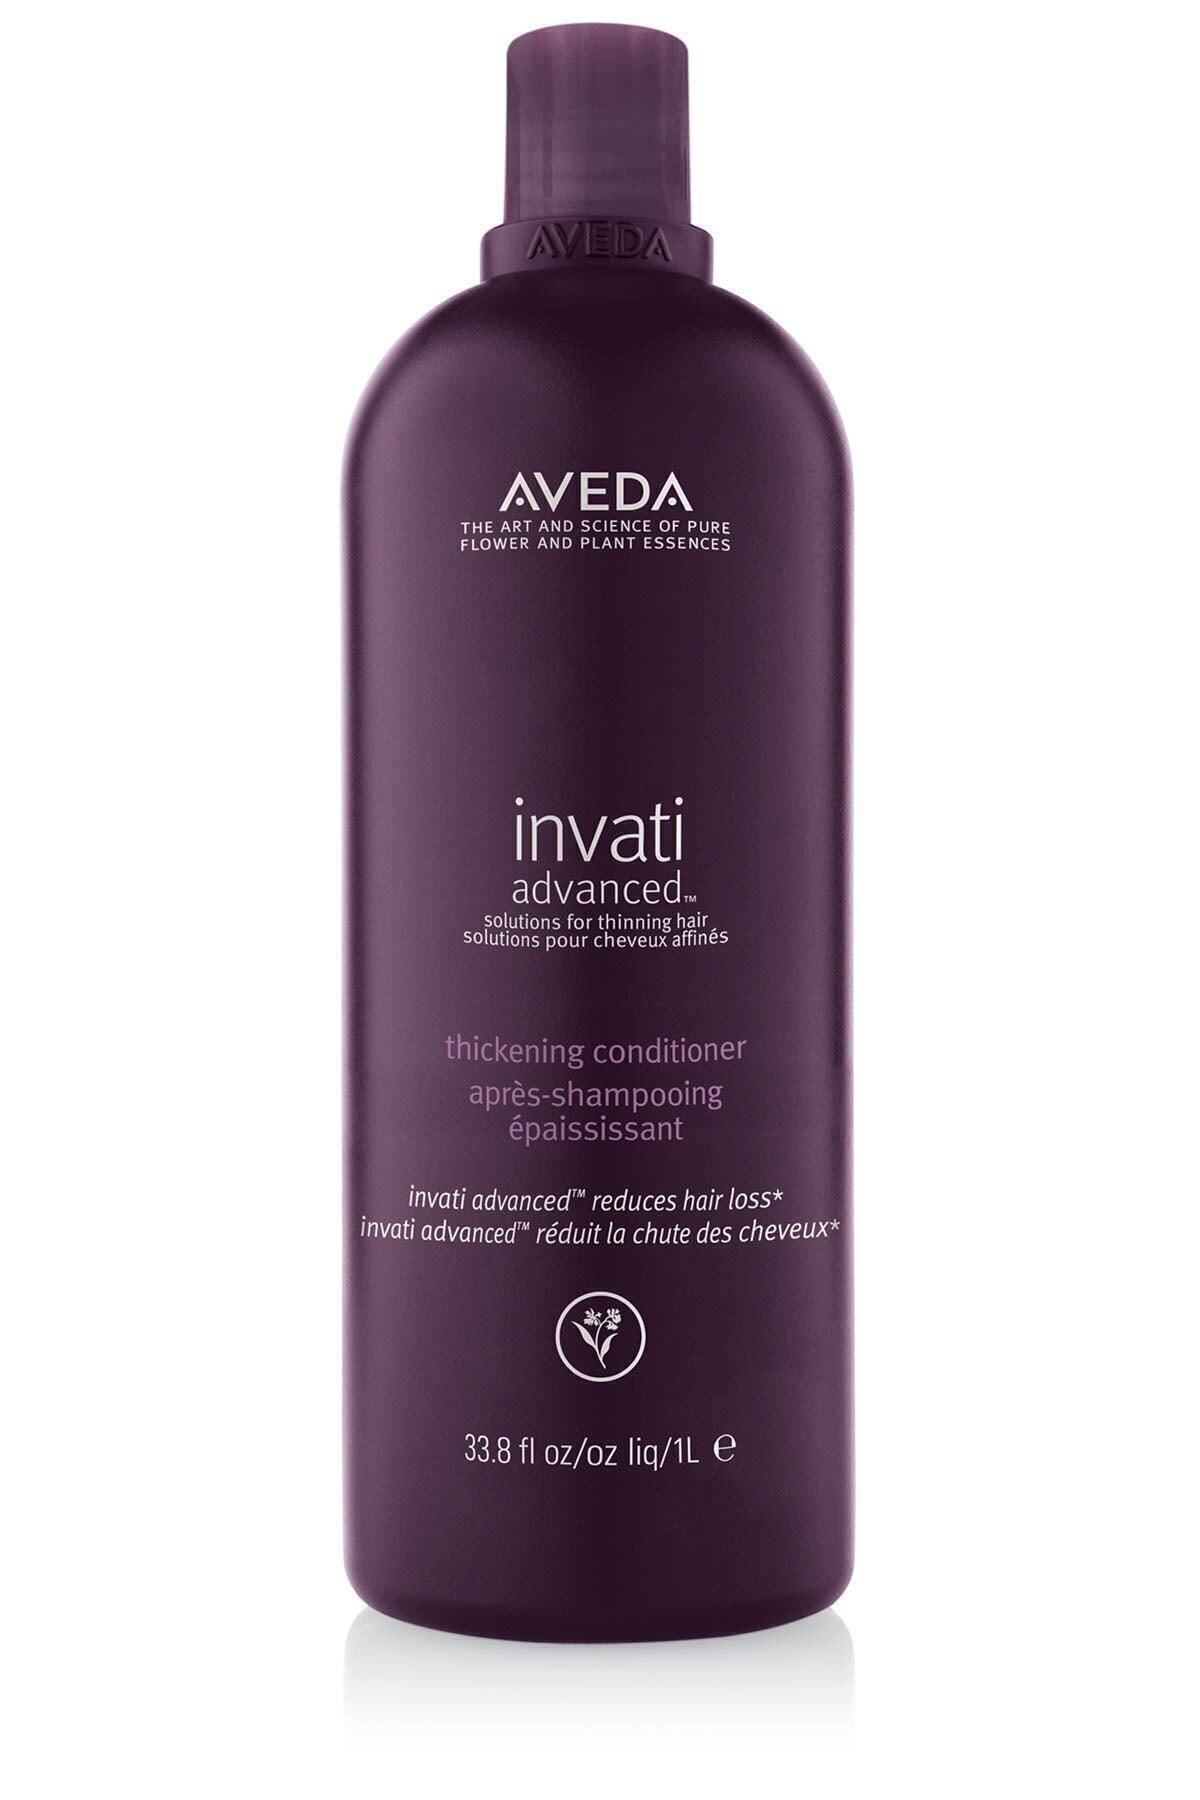 Aveda Invati Advanced Shampoo Against Hair Loss AND PROTECTIVE: Rich Texture 1000ml KEYKUAFORR2127